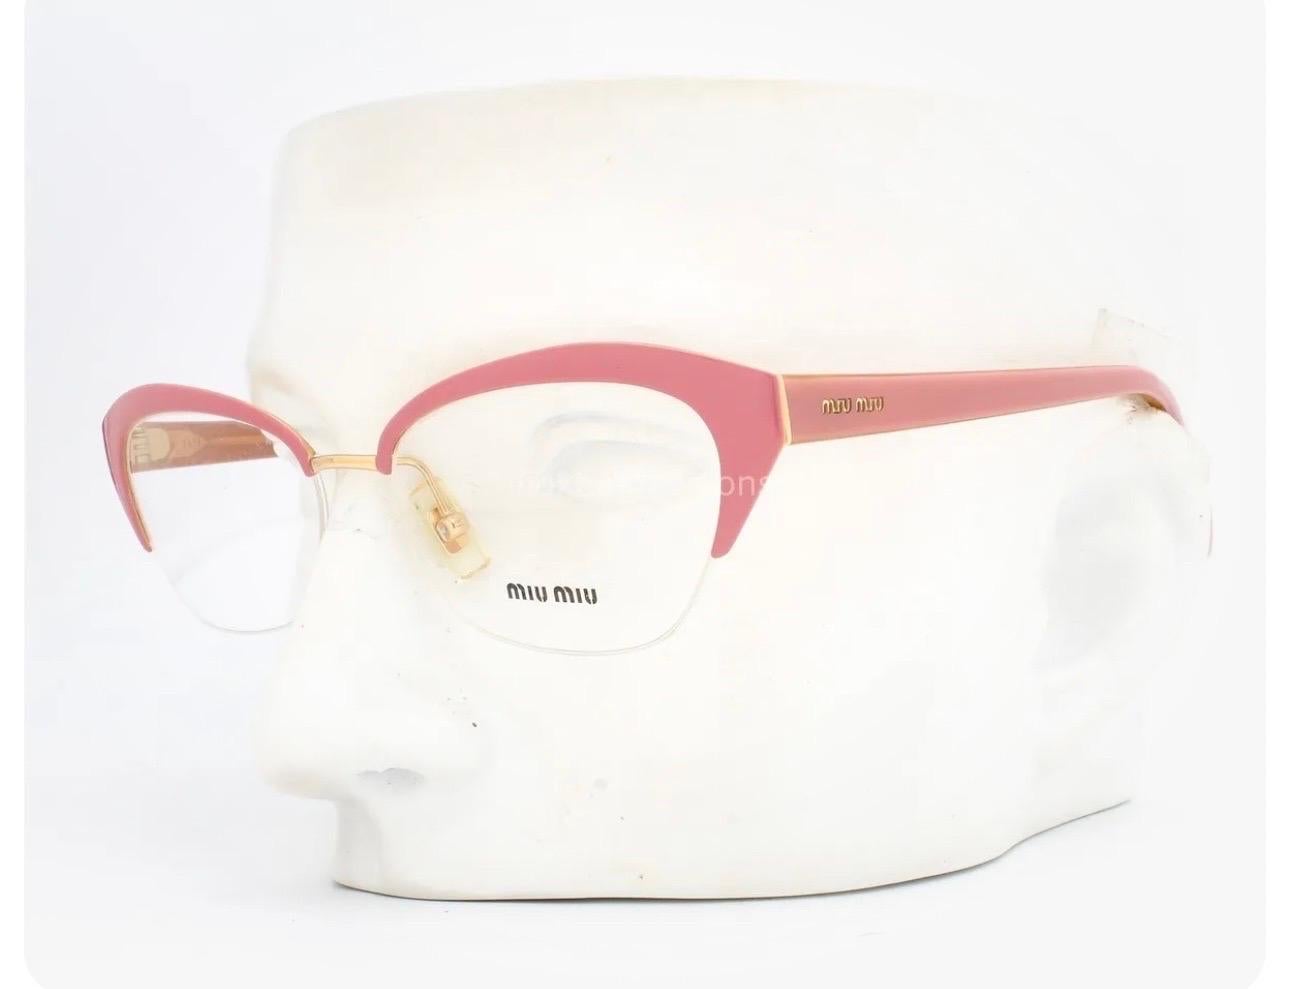 
Miu Miu VMU 50L 52-17 LA9-101  140 Optical Gold/ Pink Eyeglasses ,
Made in  Italy


Directed to younger generations, Miu Miu is tailored for hip, spirited individuals that aren’t afraid to stand out. A free-spirited feel is conveyed through the